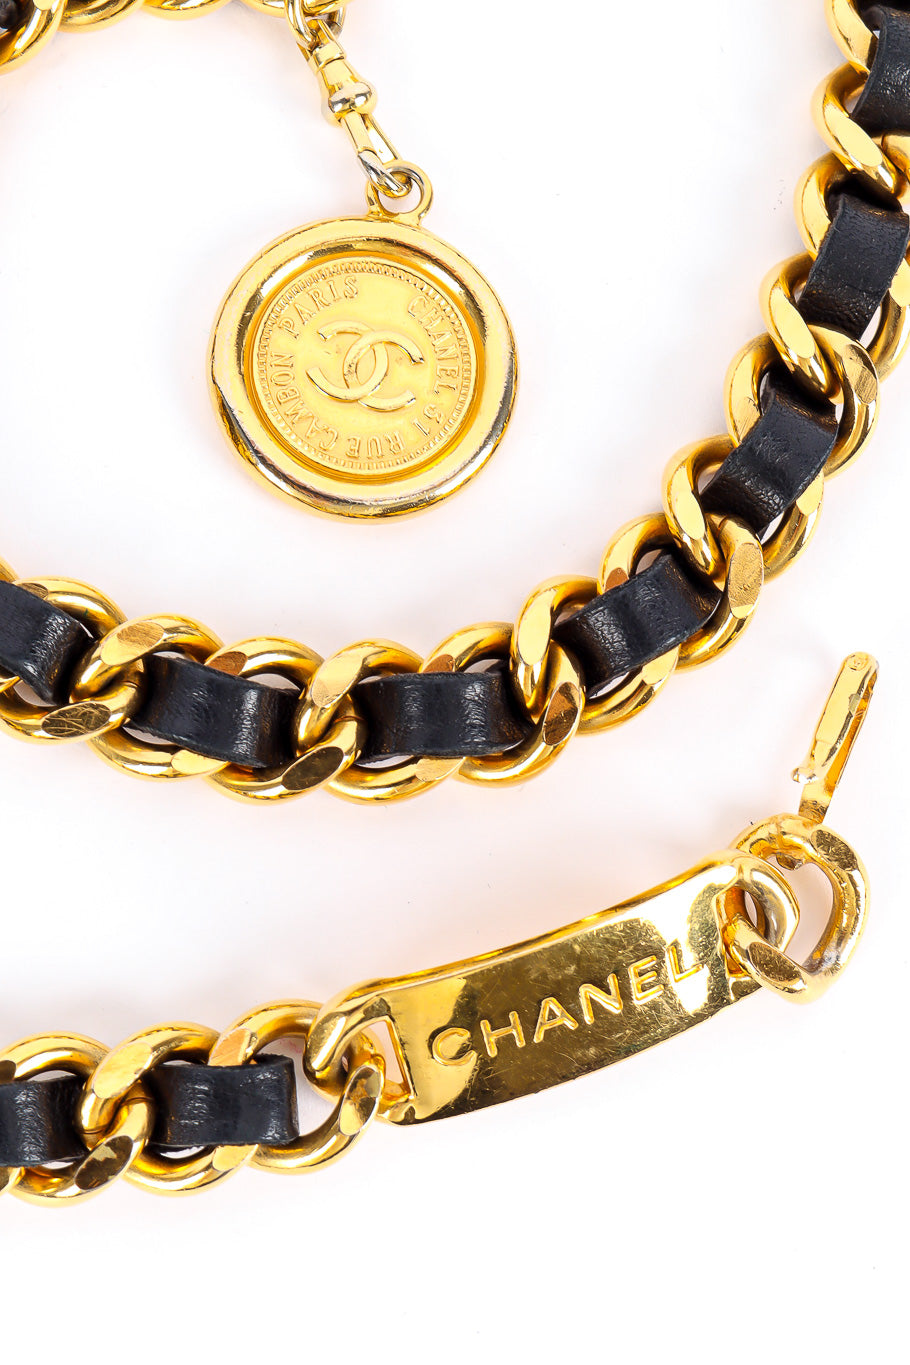 Iconic vintage coin belt by Chanel Photo of Medallion, Chain and Chanel Plaque. @recessla